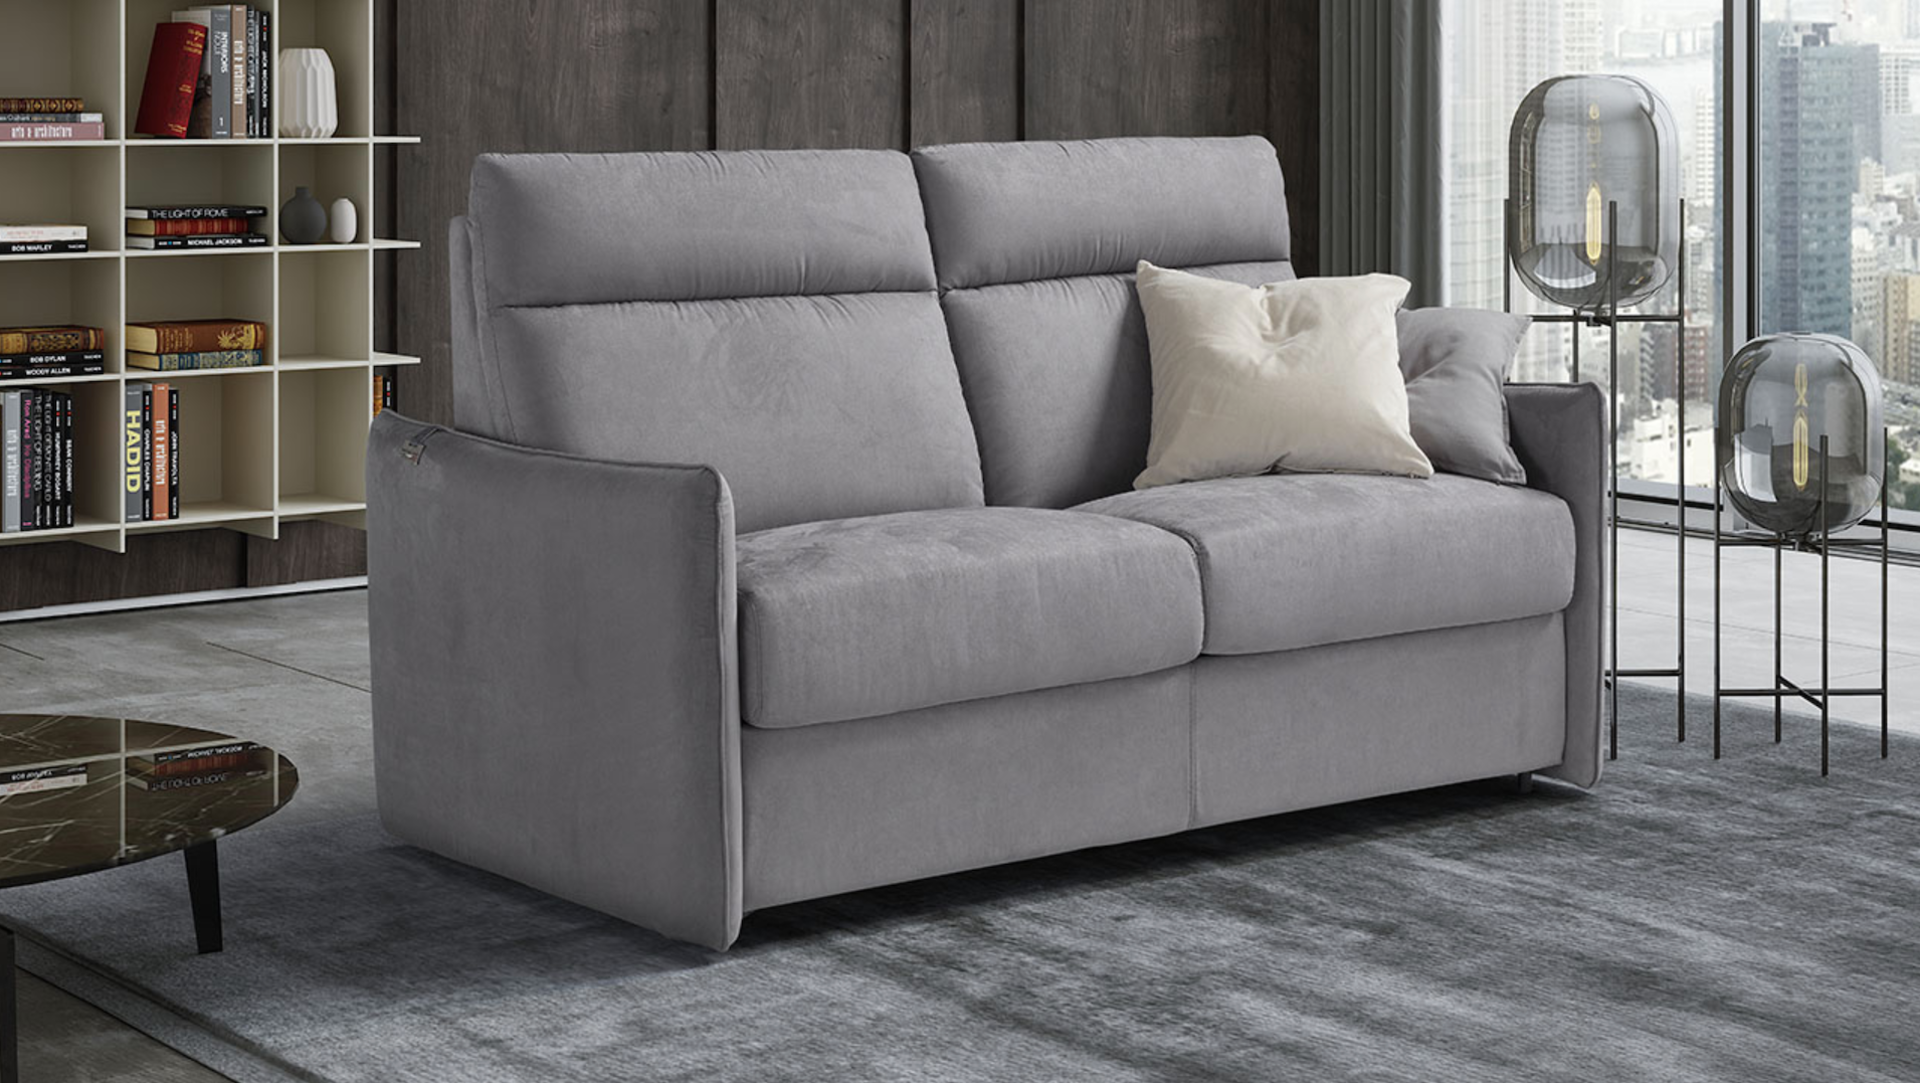 ‘AIMEE’ Italian Crafted 3 Seat Sofa Bed in PLAZA GREY. RRP £1979